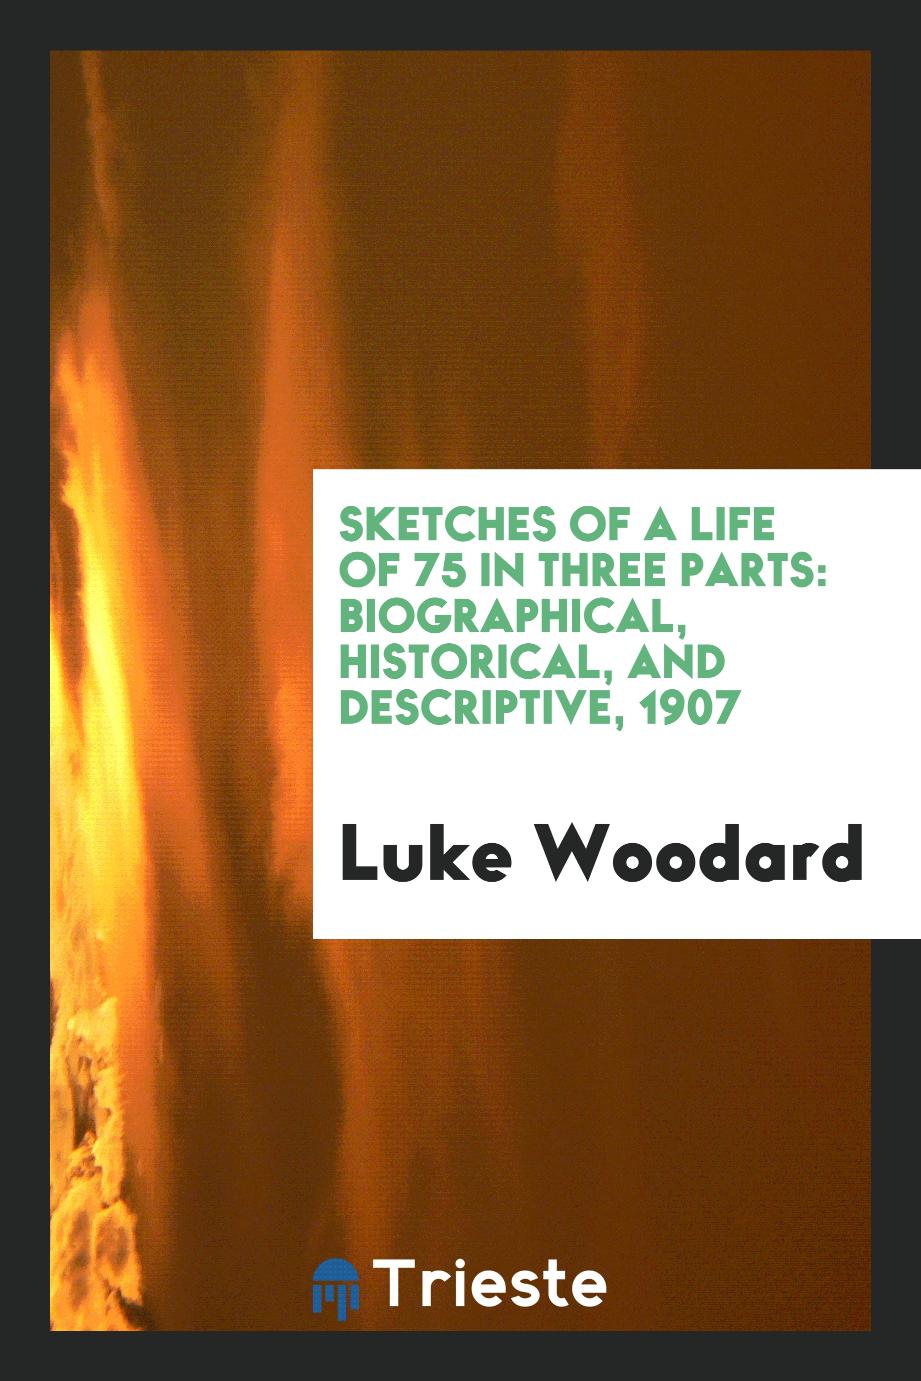 Sketches of a life of 75 in three parts: biographical, historical, and descriptive, 1907